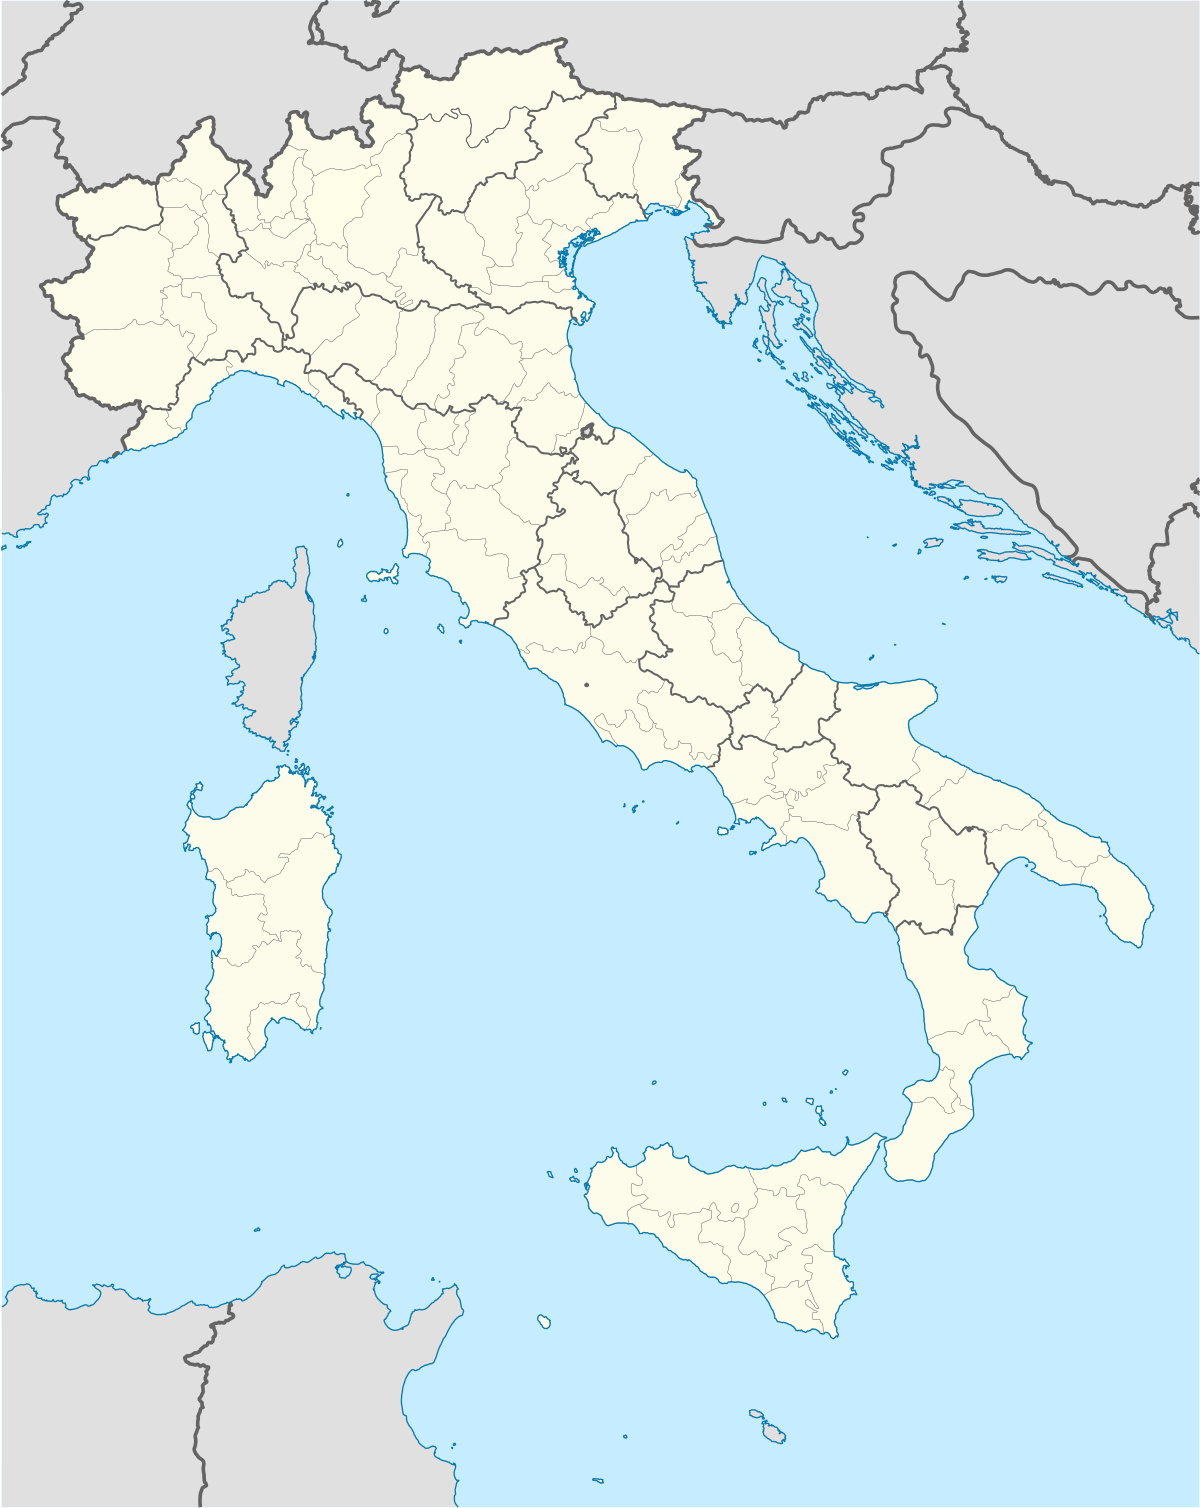 1200px-Italy_provincial_location_map_2016.svg.png